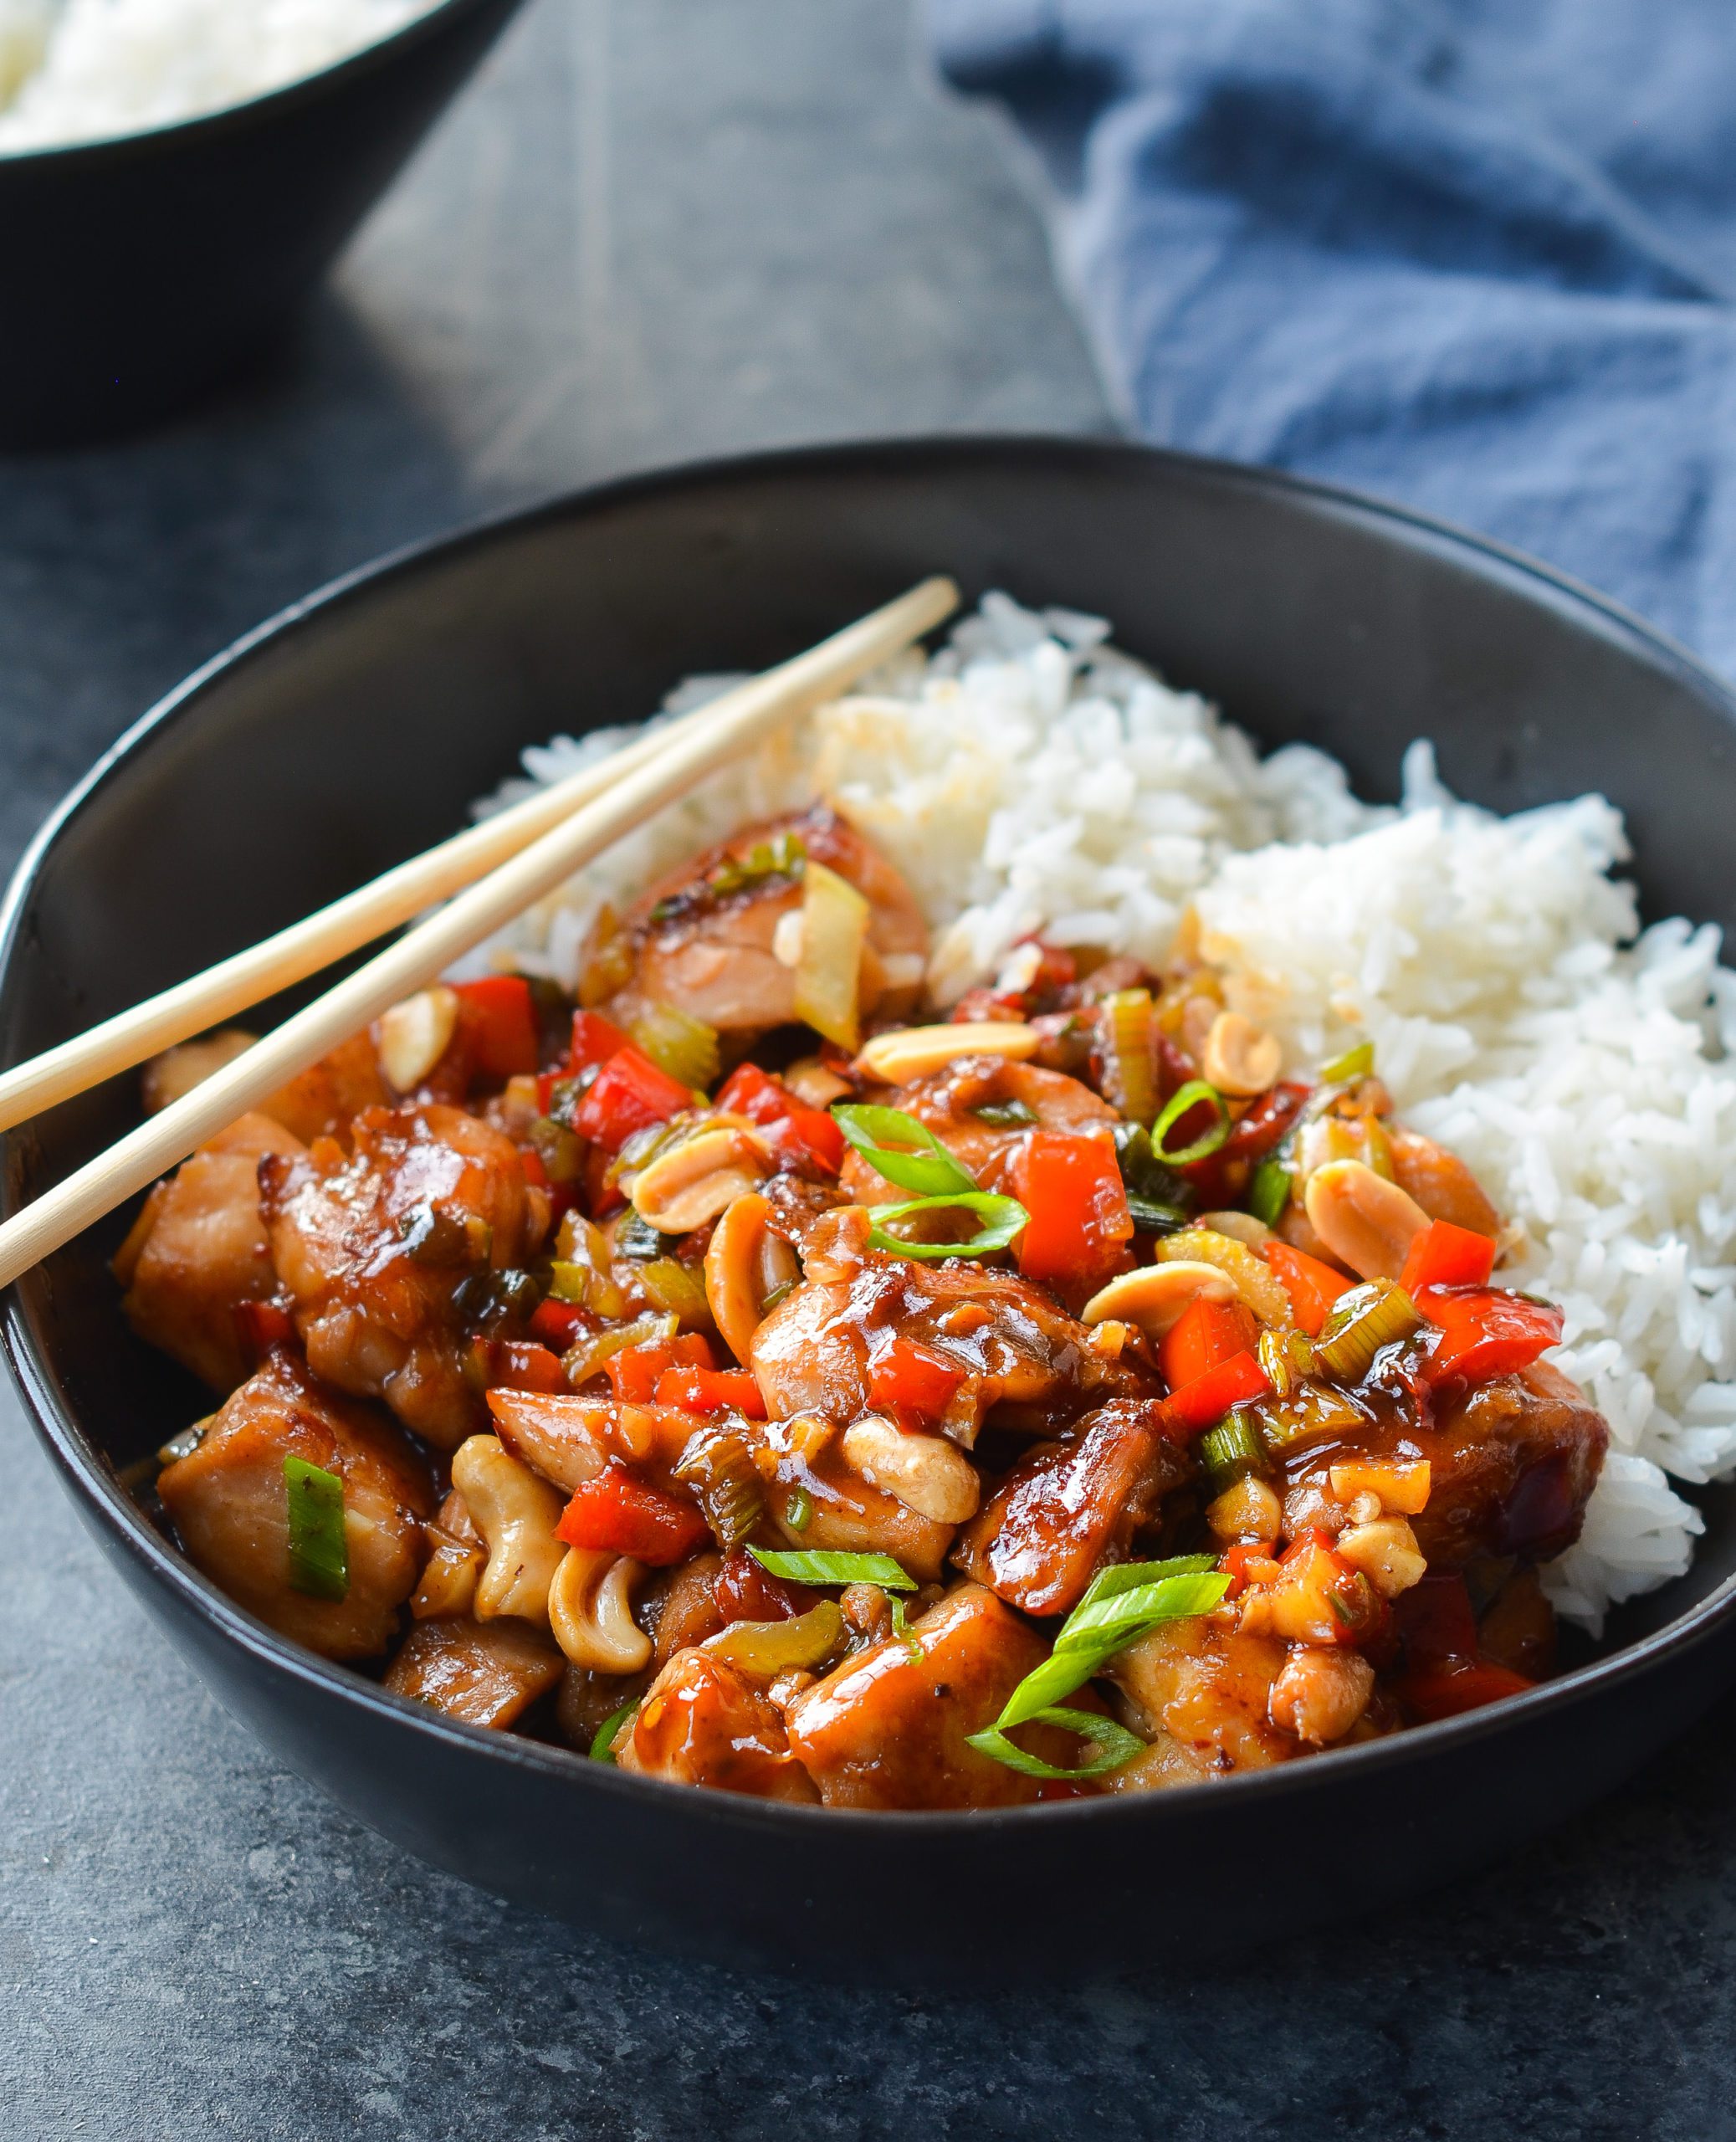 I. Introduction to Kung Pao Chicken